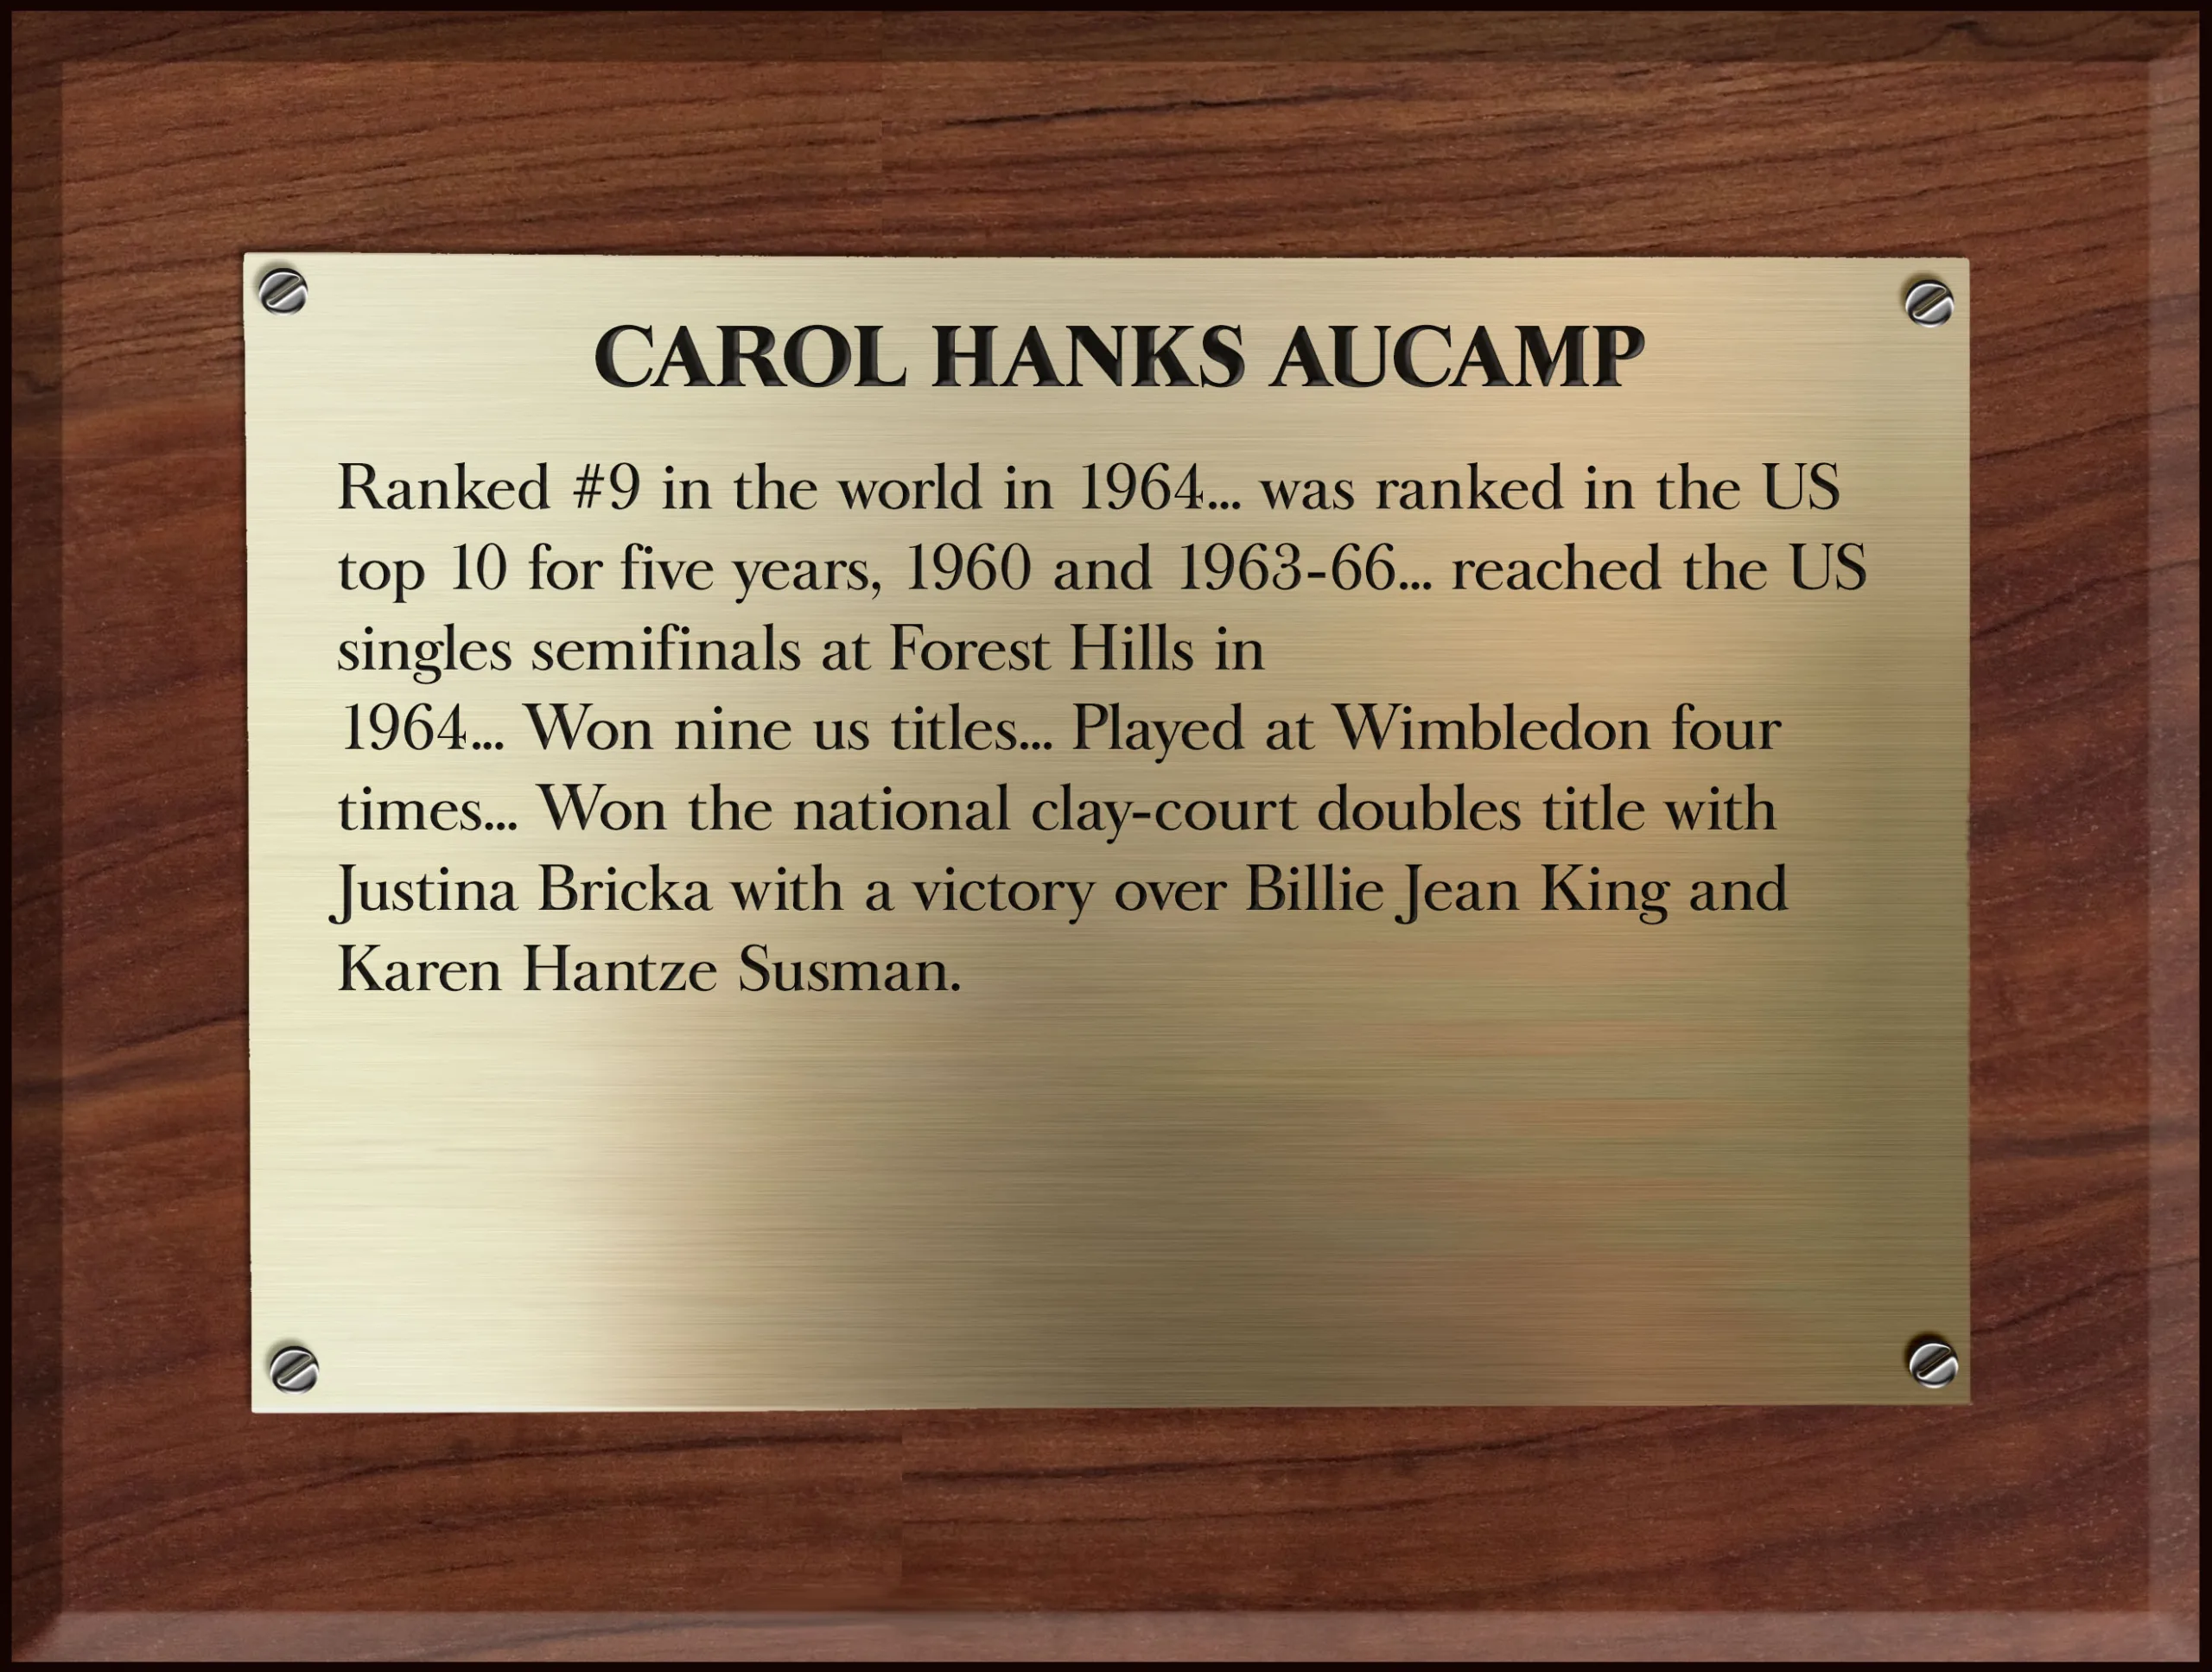 Text on plaque: Carol Hanks Aucamp Ranked #9 in the world in 1964... was ranked in the US top 10 for five years, 1960 and 1963-66... reached the US singles semifinals at Forest Hills in 1964... Won nine us titles... Played at Wimbledon four times... Won the national clay-court doubles title with Justina Bricka with a victory over Billie Jean King and Karen Hantze Susman.